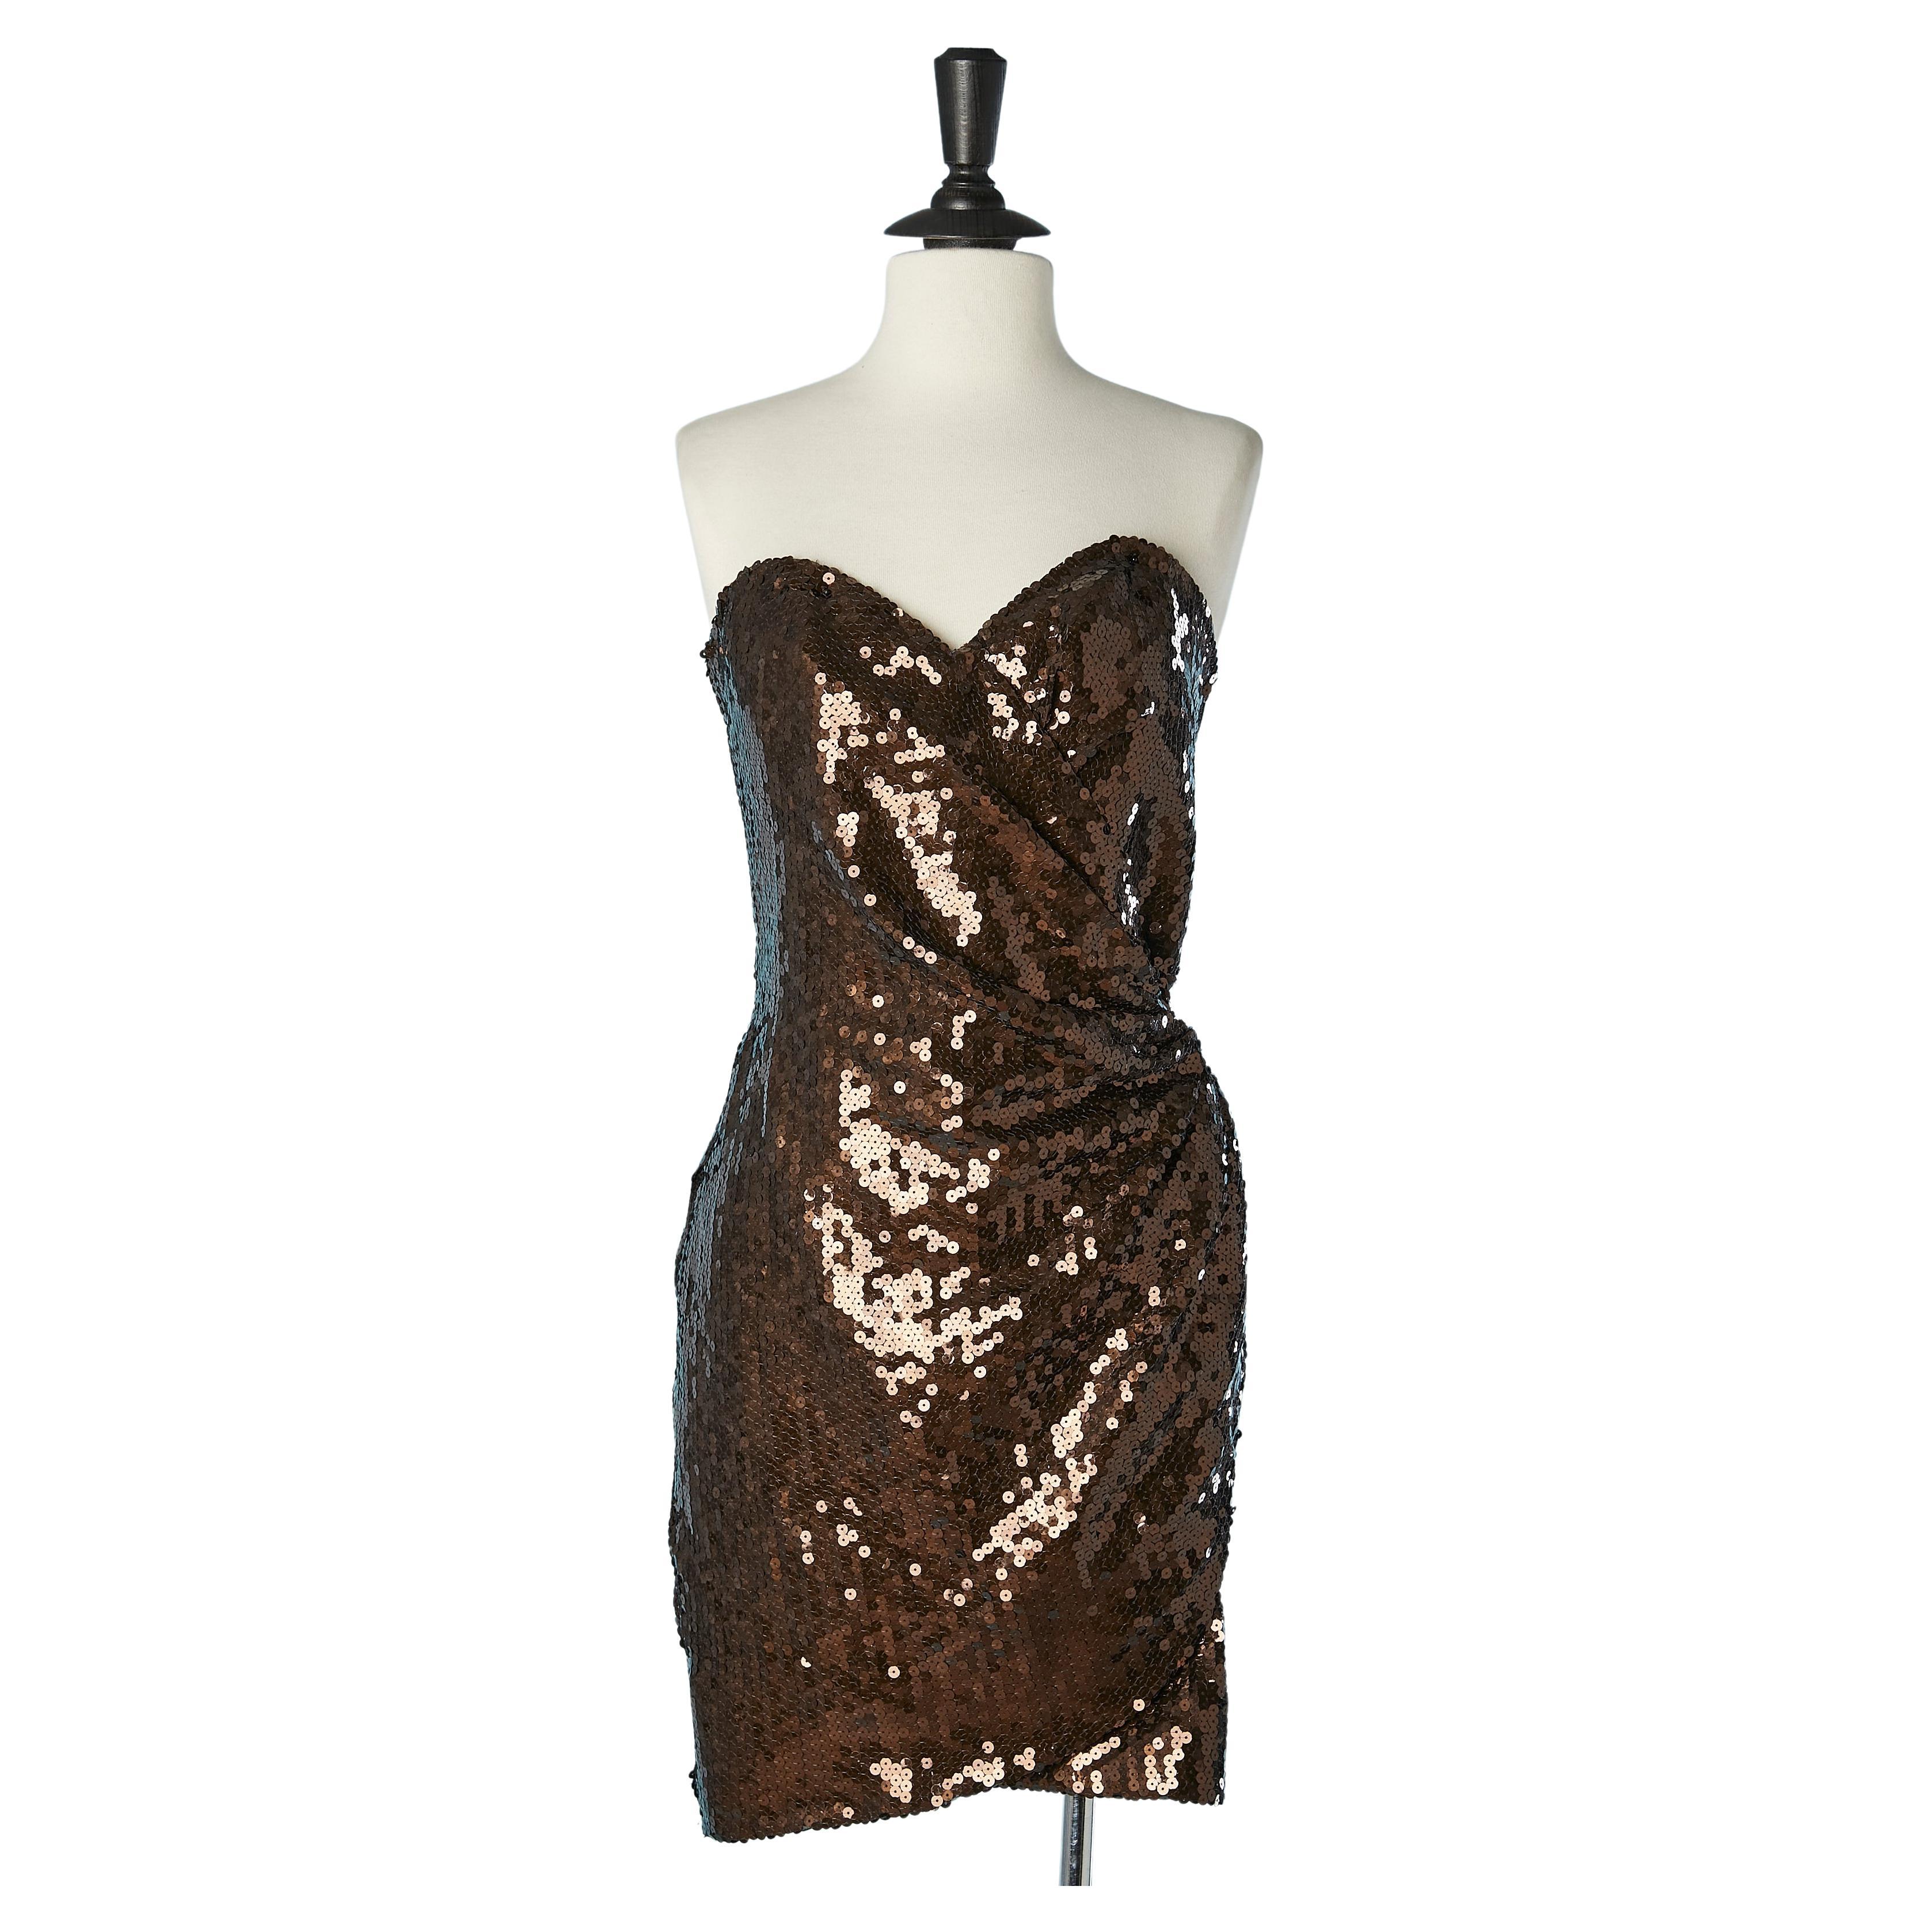  Wrap bustier cocktail dress in brown sequin Thierry Mugler  For Sale